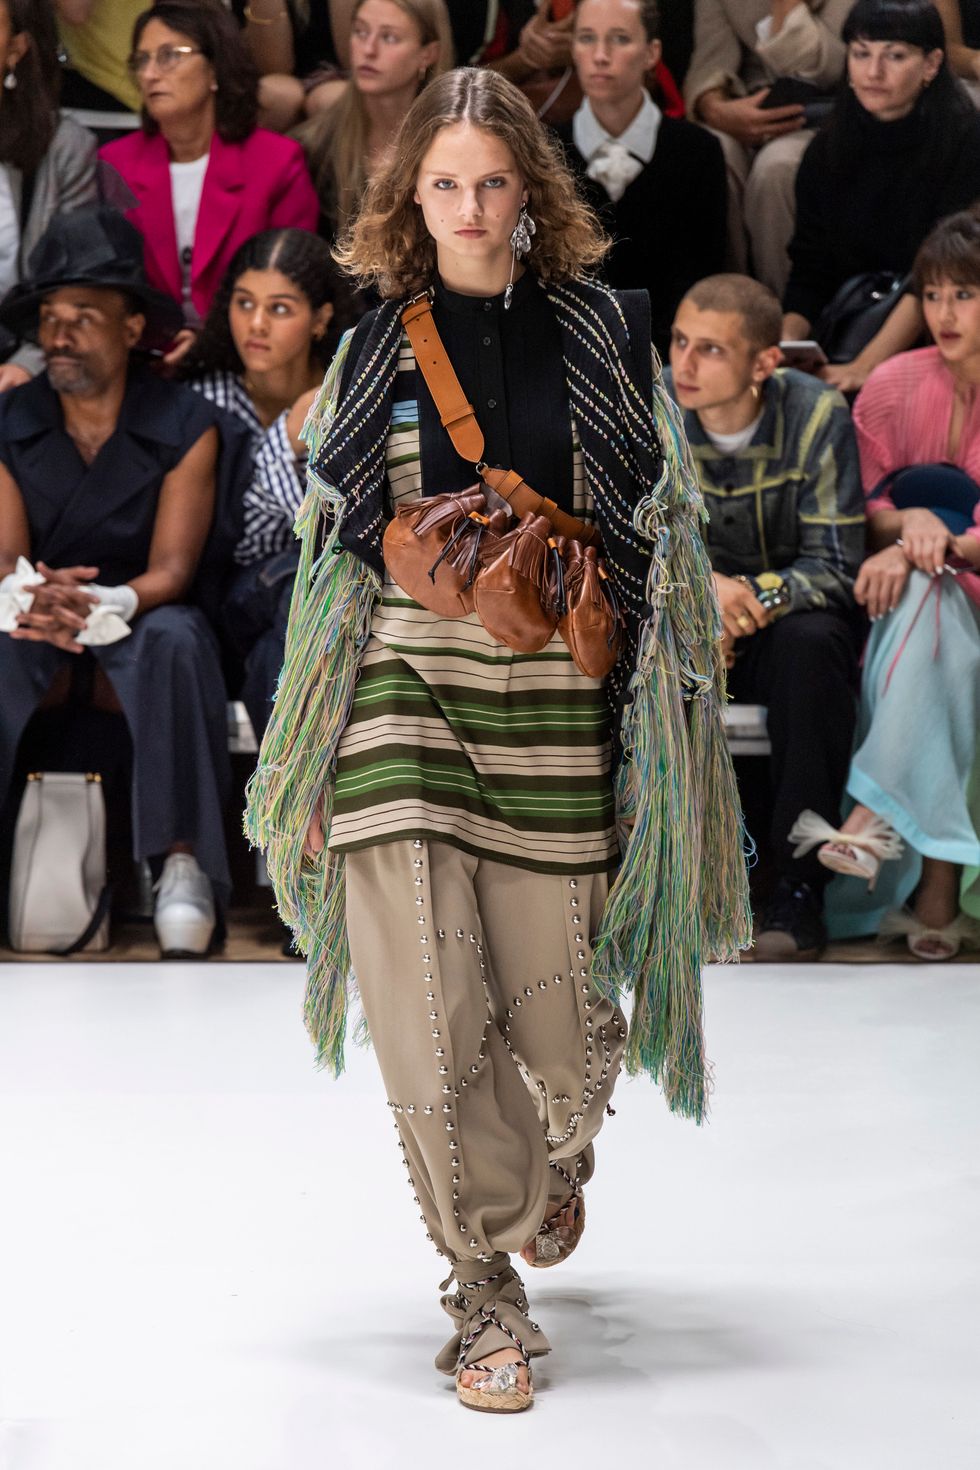 Hermès Objets spring/summer 2020: The standout accessories in the